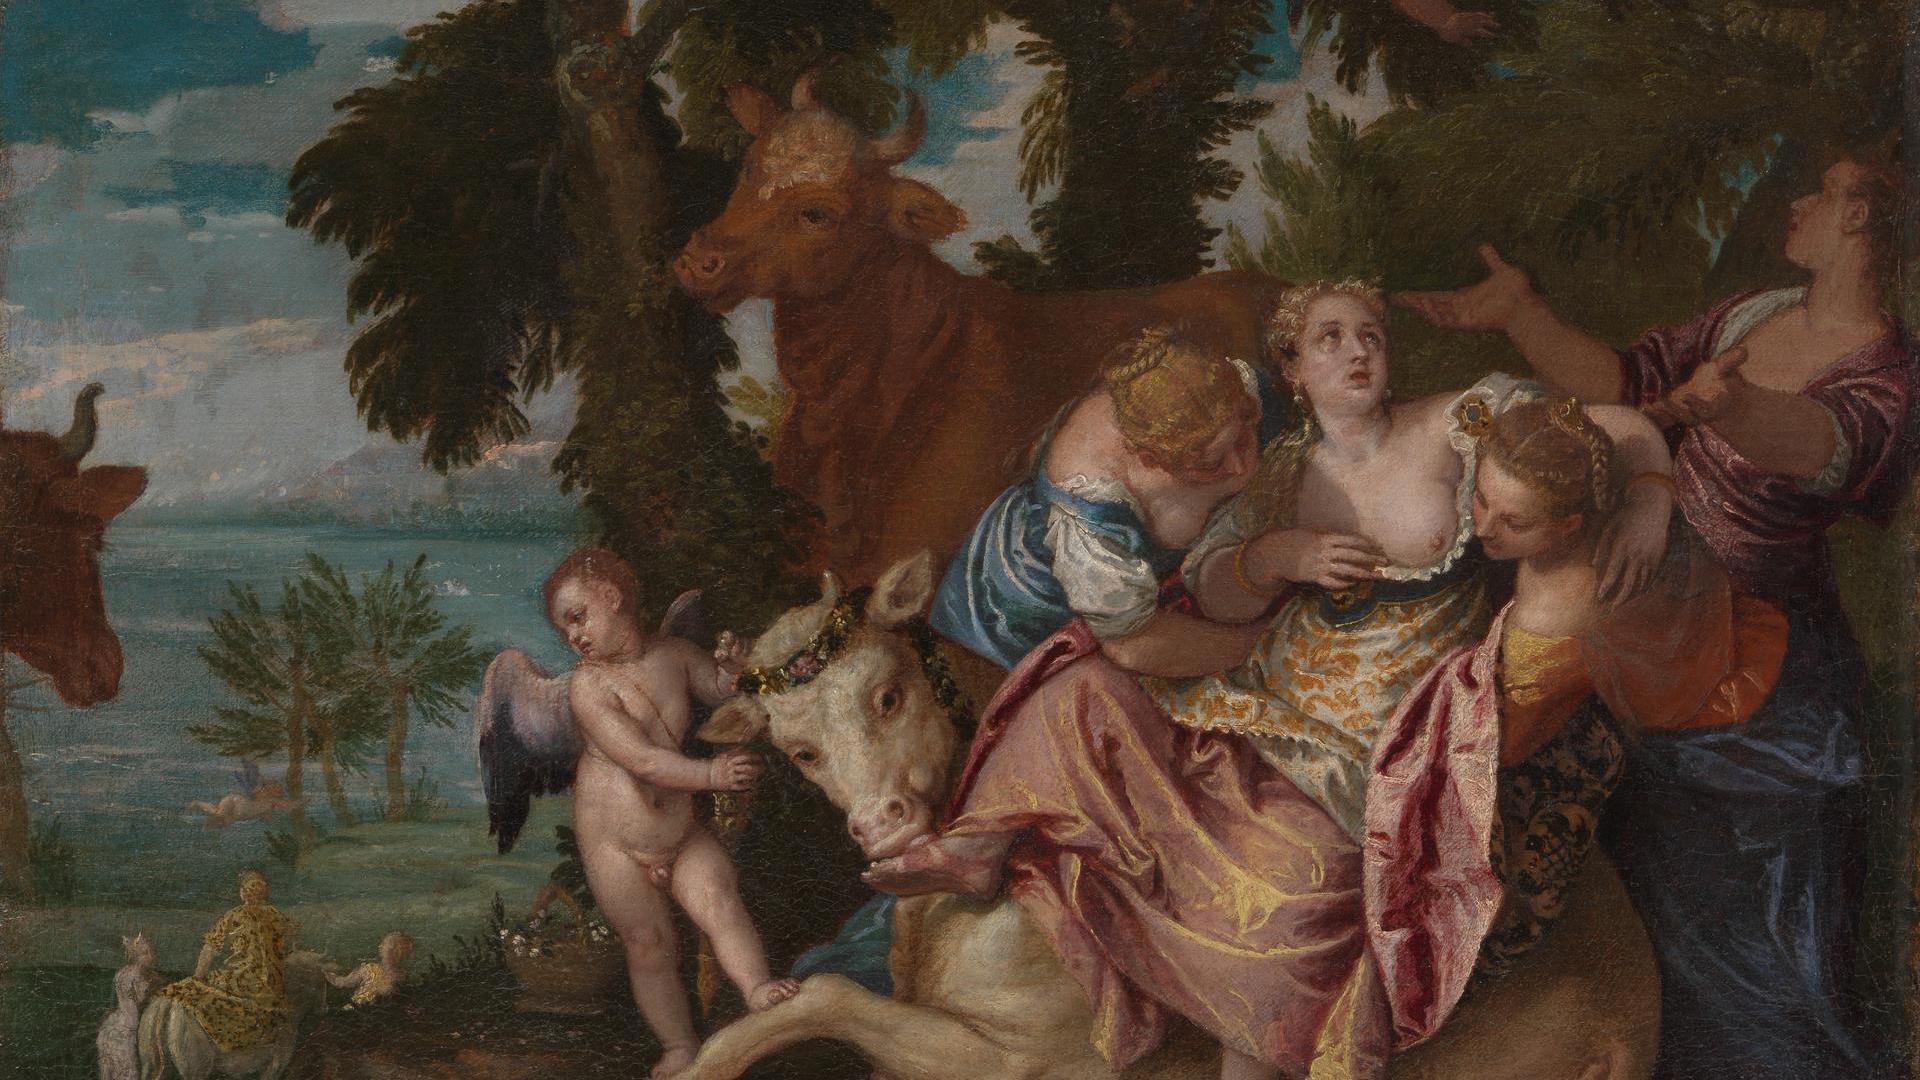 The Rape of Europa by Paolo Veronese